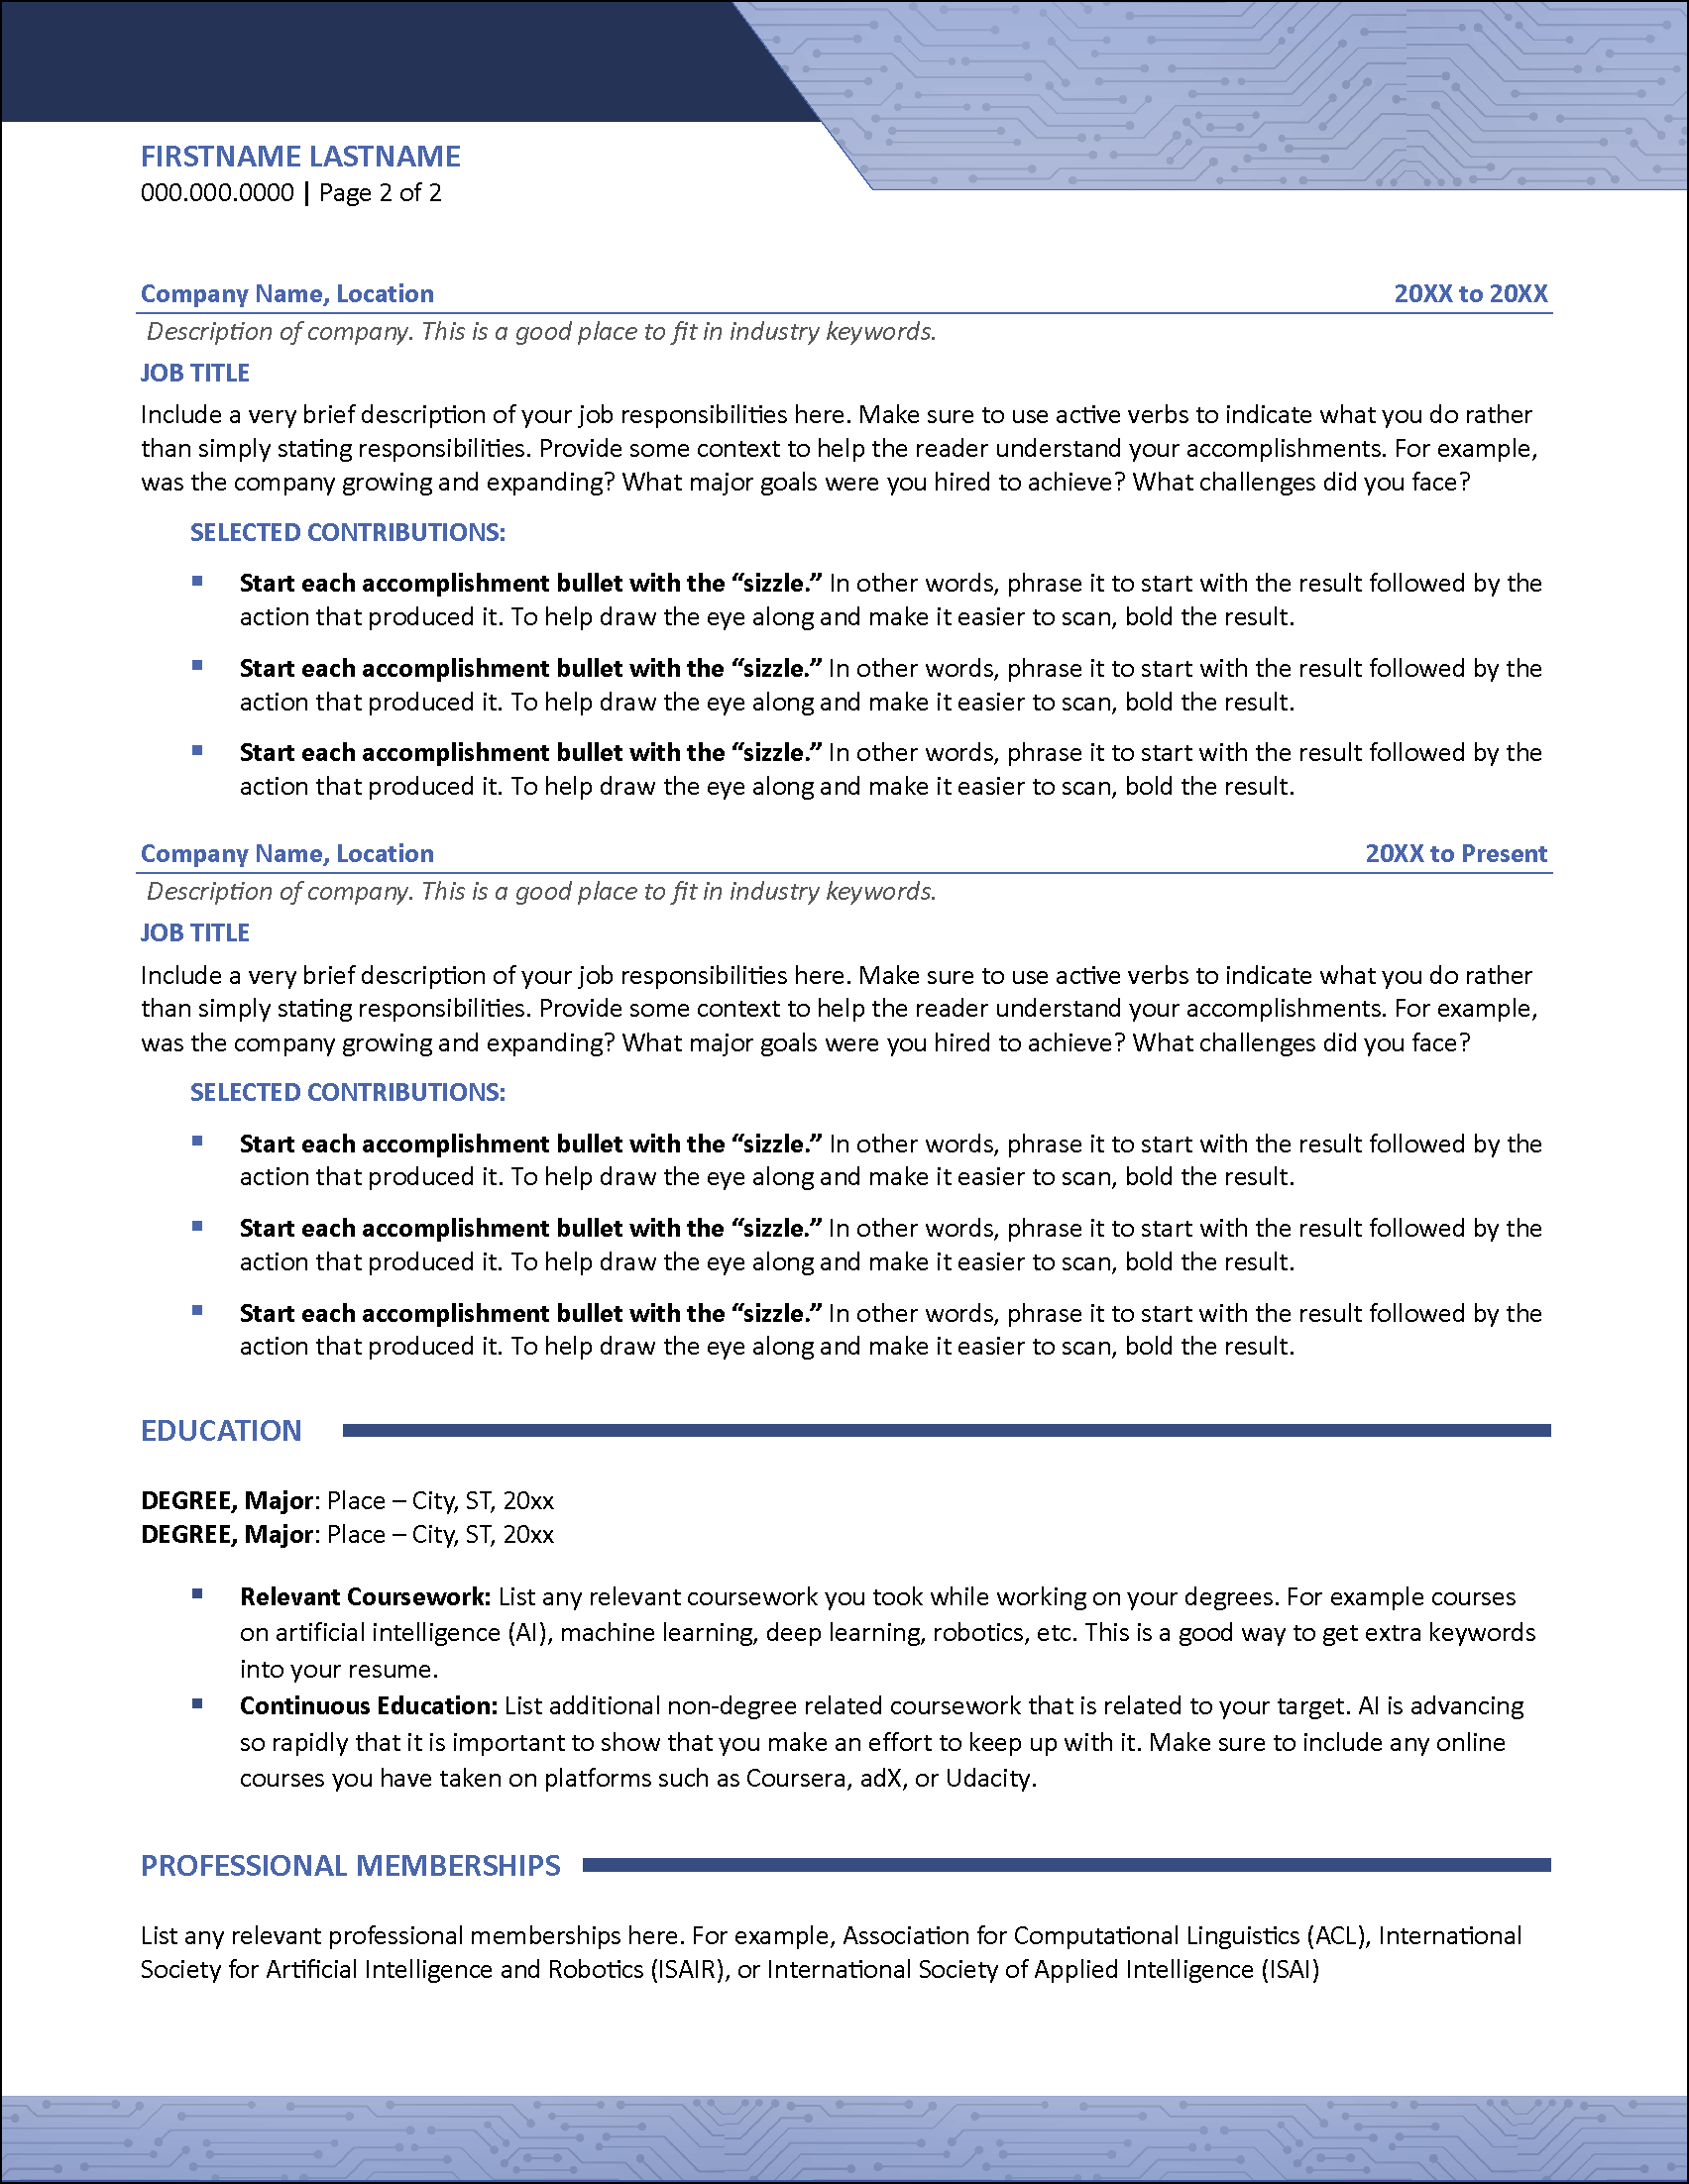 Artificial Intelligence Resume Page 2